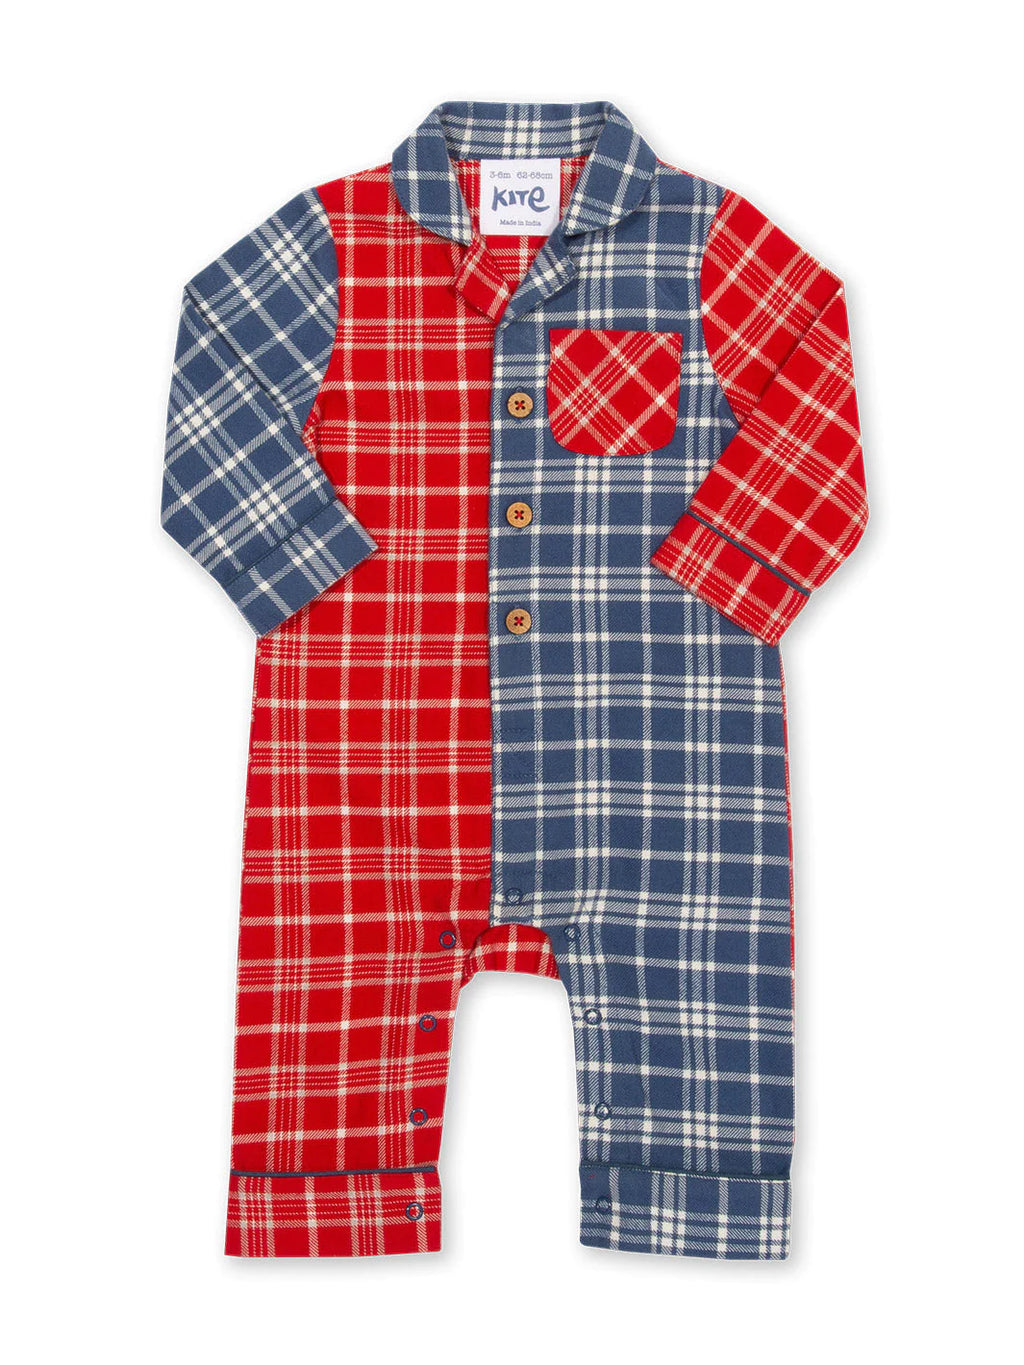 Kite Clothing Red & Navy Hotchpotch Checkered Baby Romper | 60% OFF